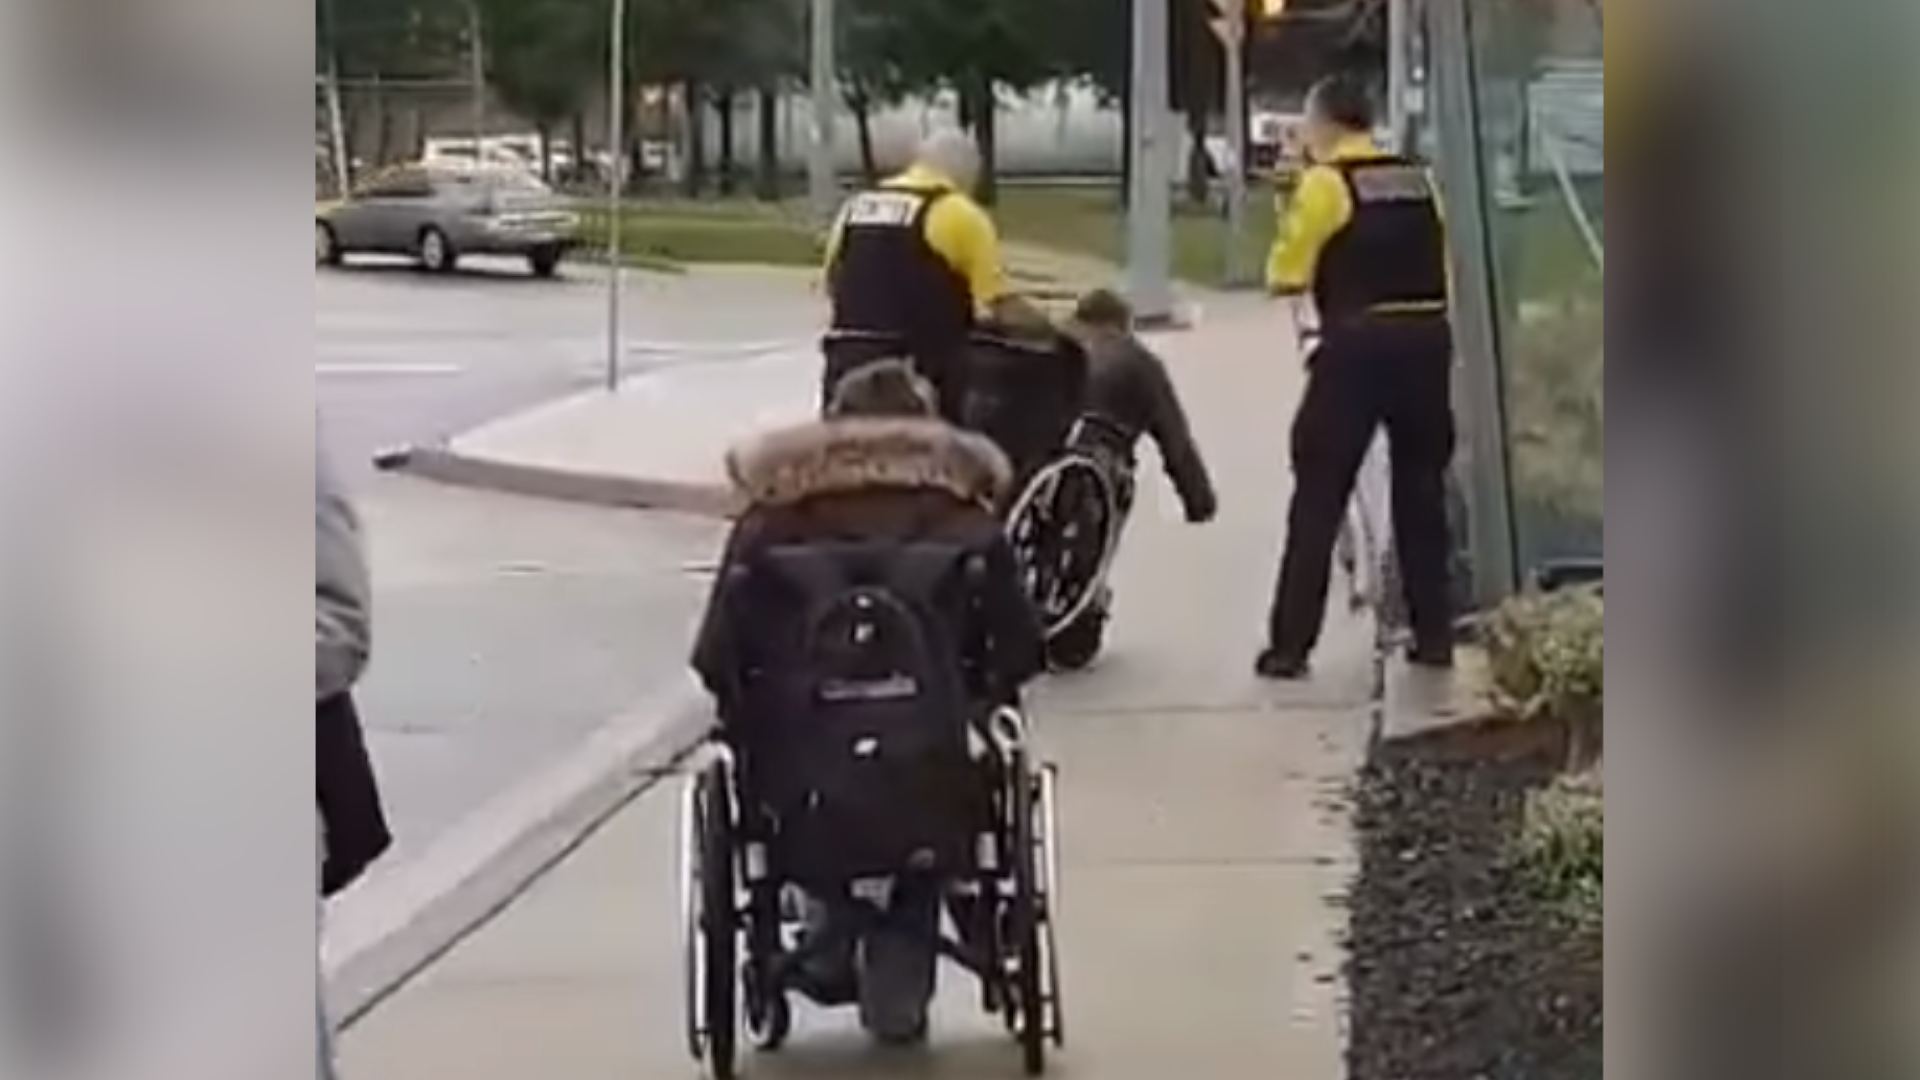 Canada News Today - Police investigate video showing security guard dumping man out of wheelchair in St. Catharines | NewsBurrow thumbnail